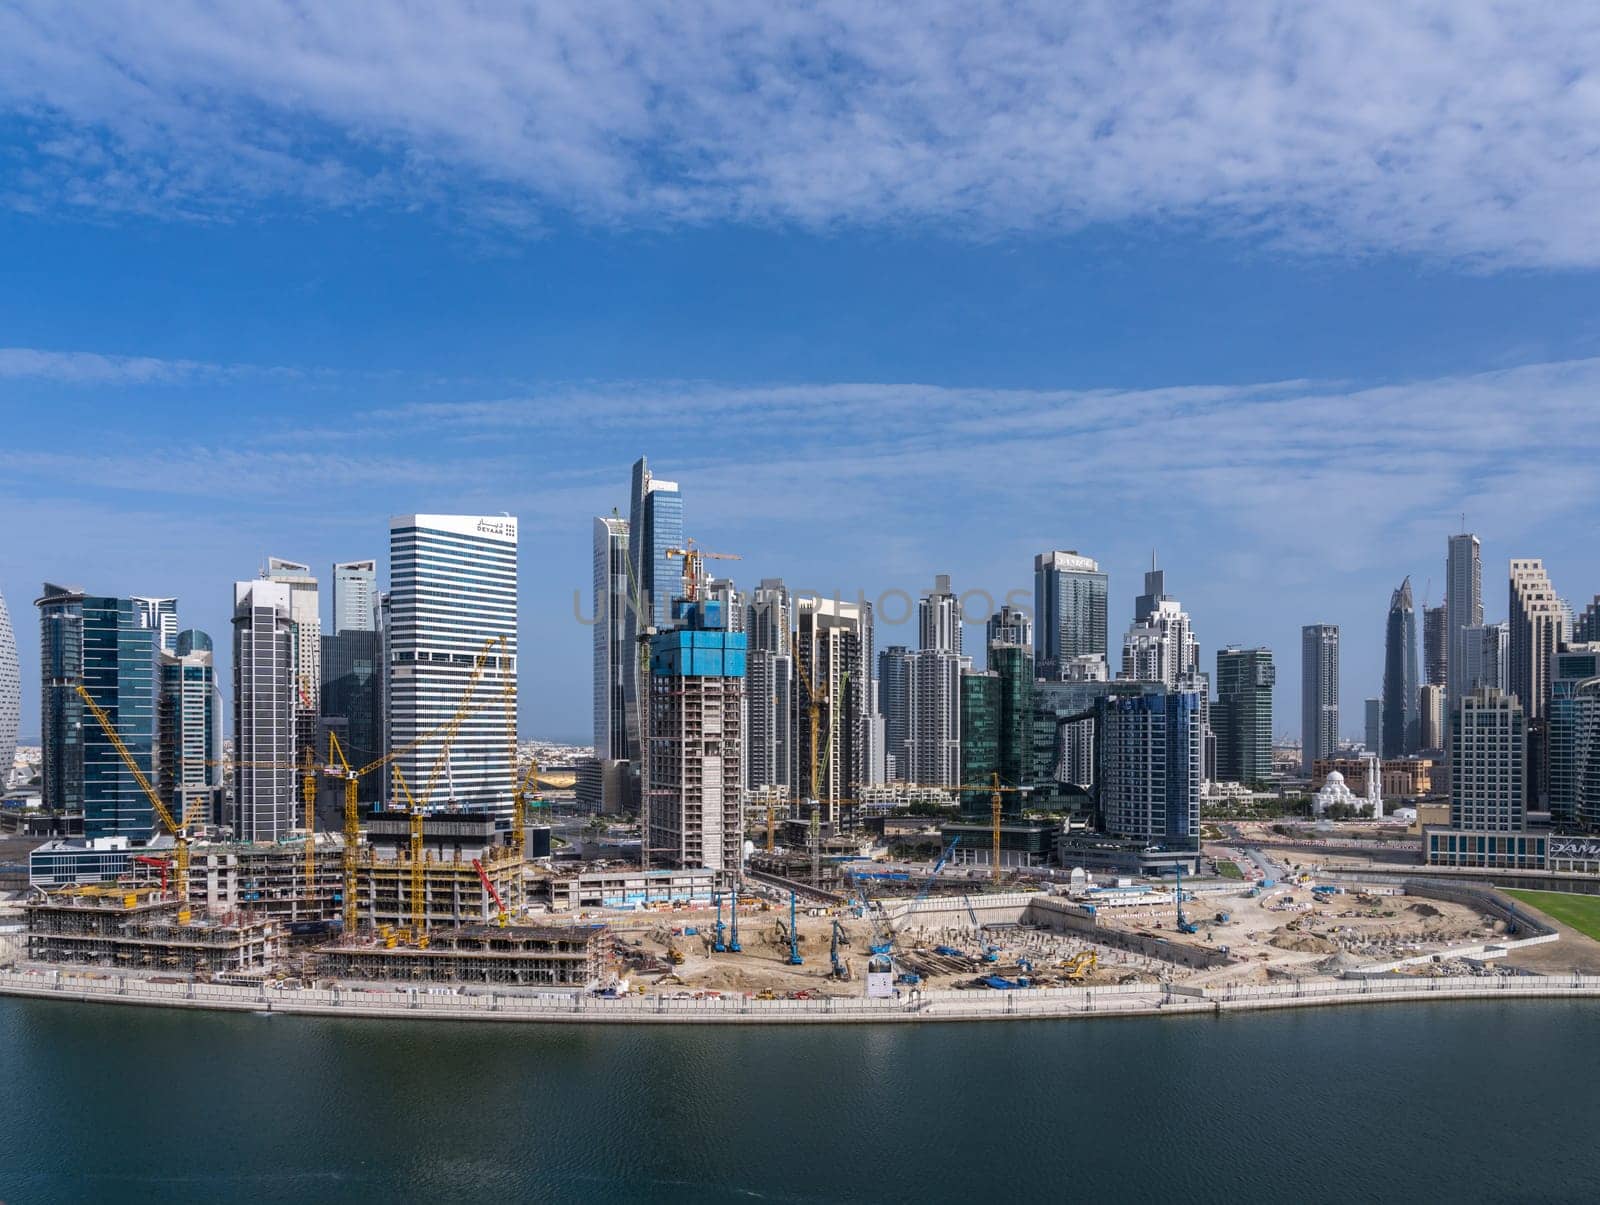 New construction of apartments in Dubai business bay district by steheap